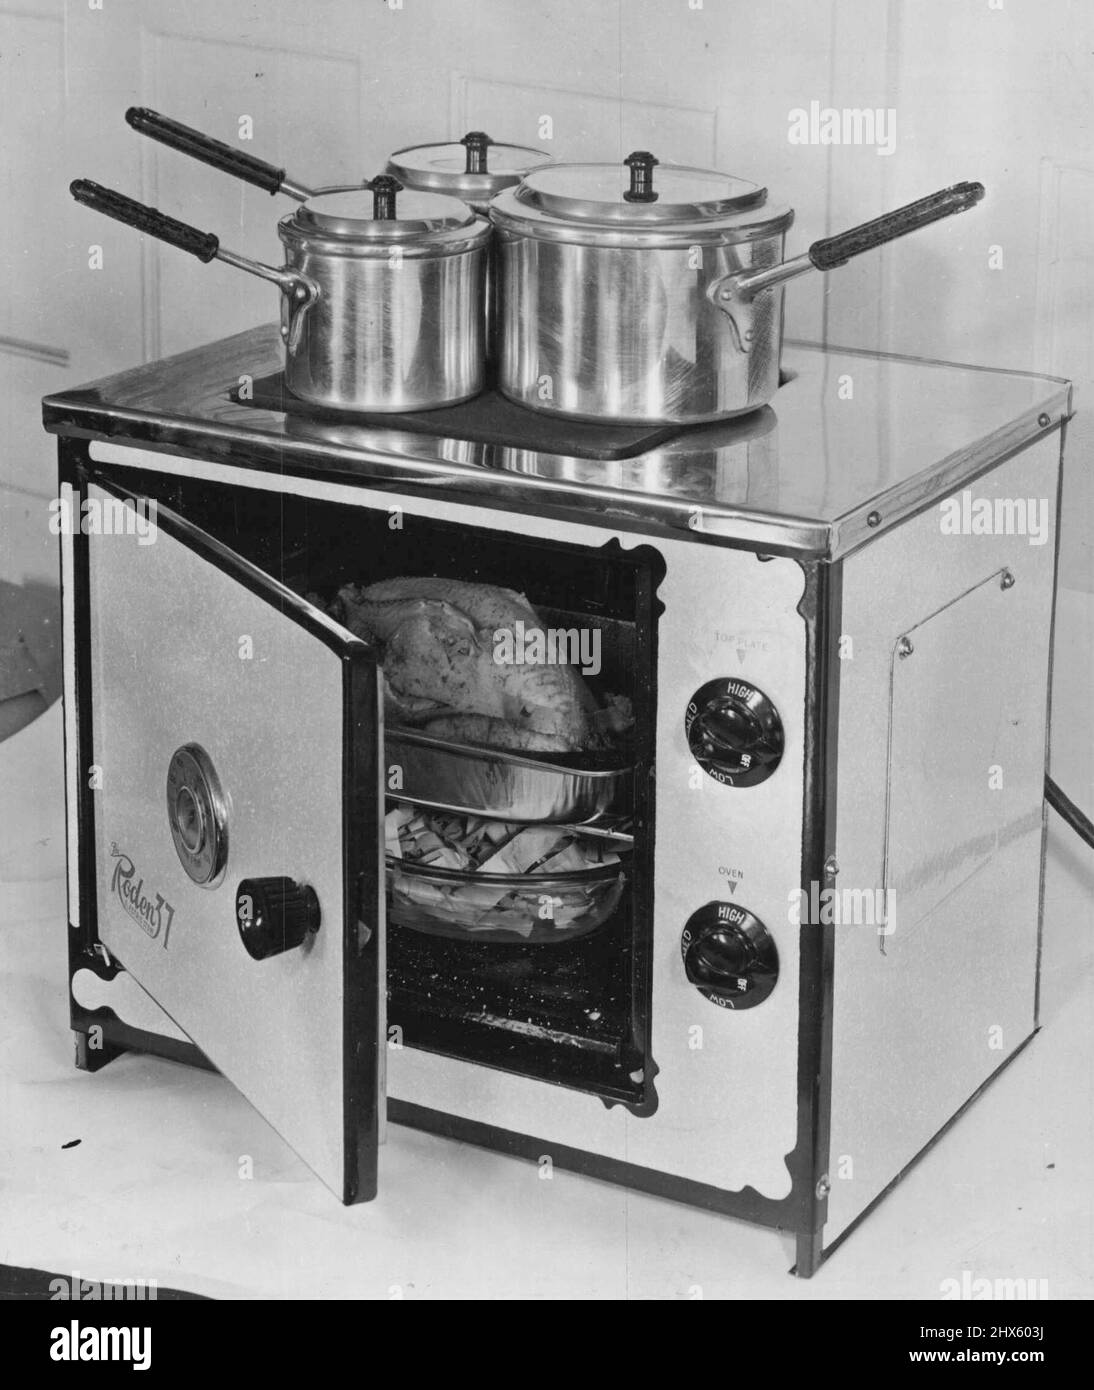 A Roden-37 electric stove. October 3, 1952.;A Roden-37 electric stove. Stock Photo